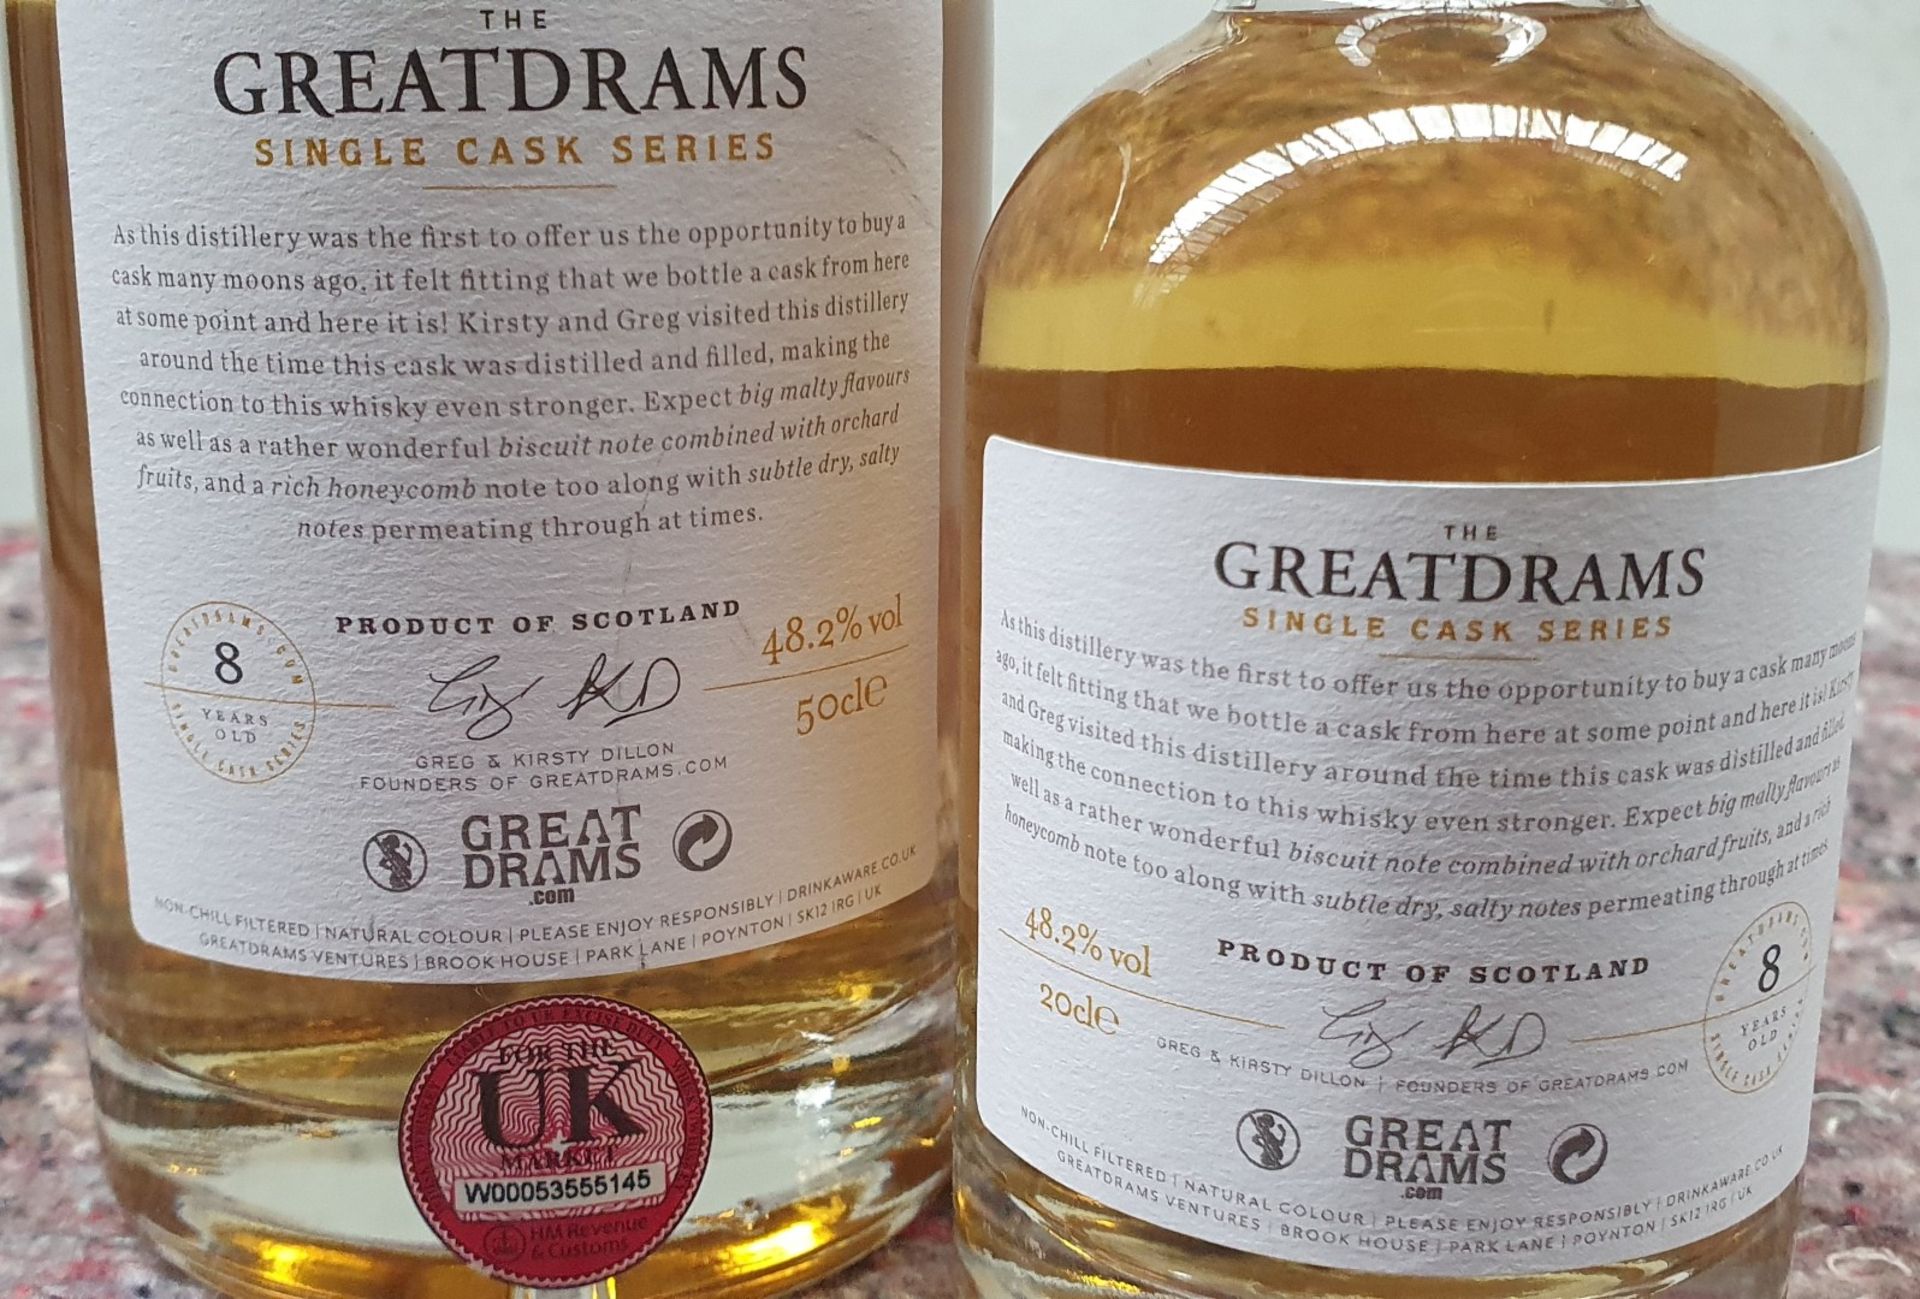 2 x Bottles of Greatdrams Single Cask Series Arran Single Malt Scotch Whisky - Includes 20cl and - Image 4 of 4